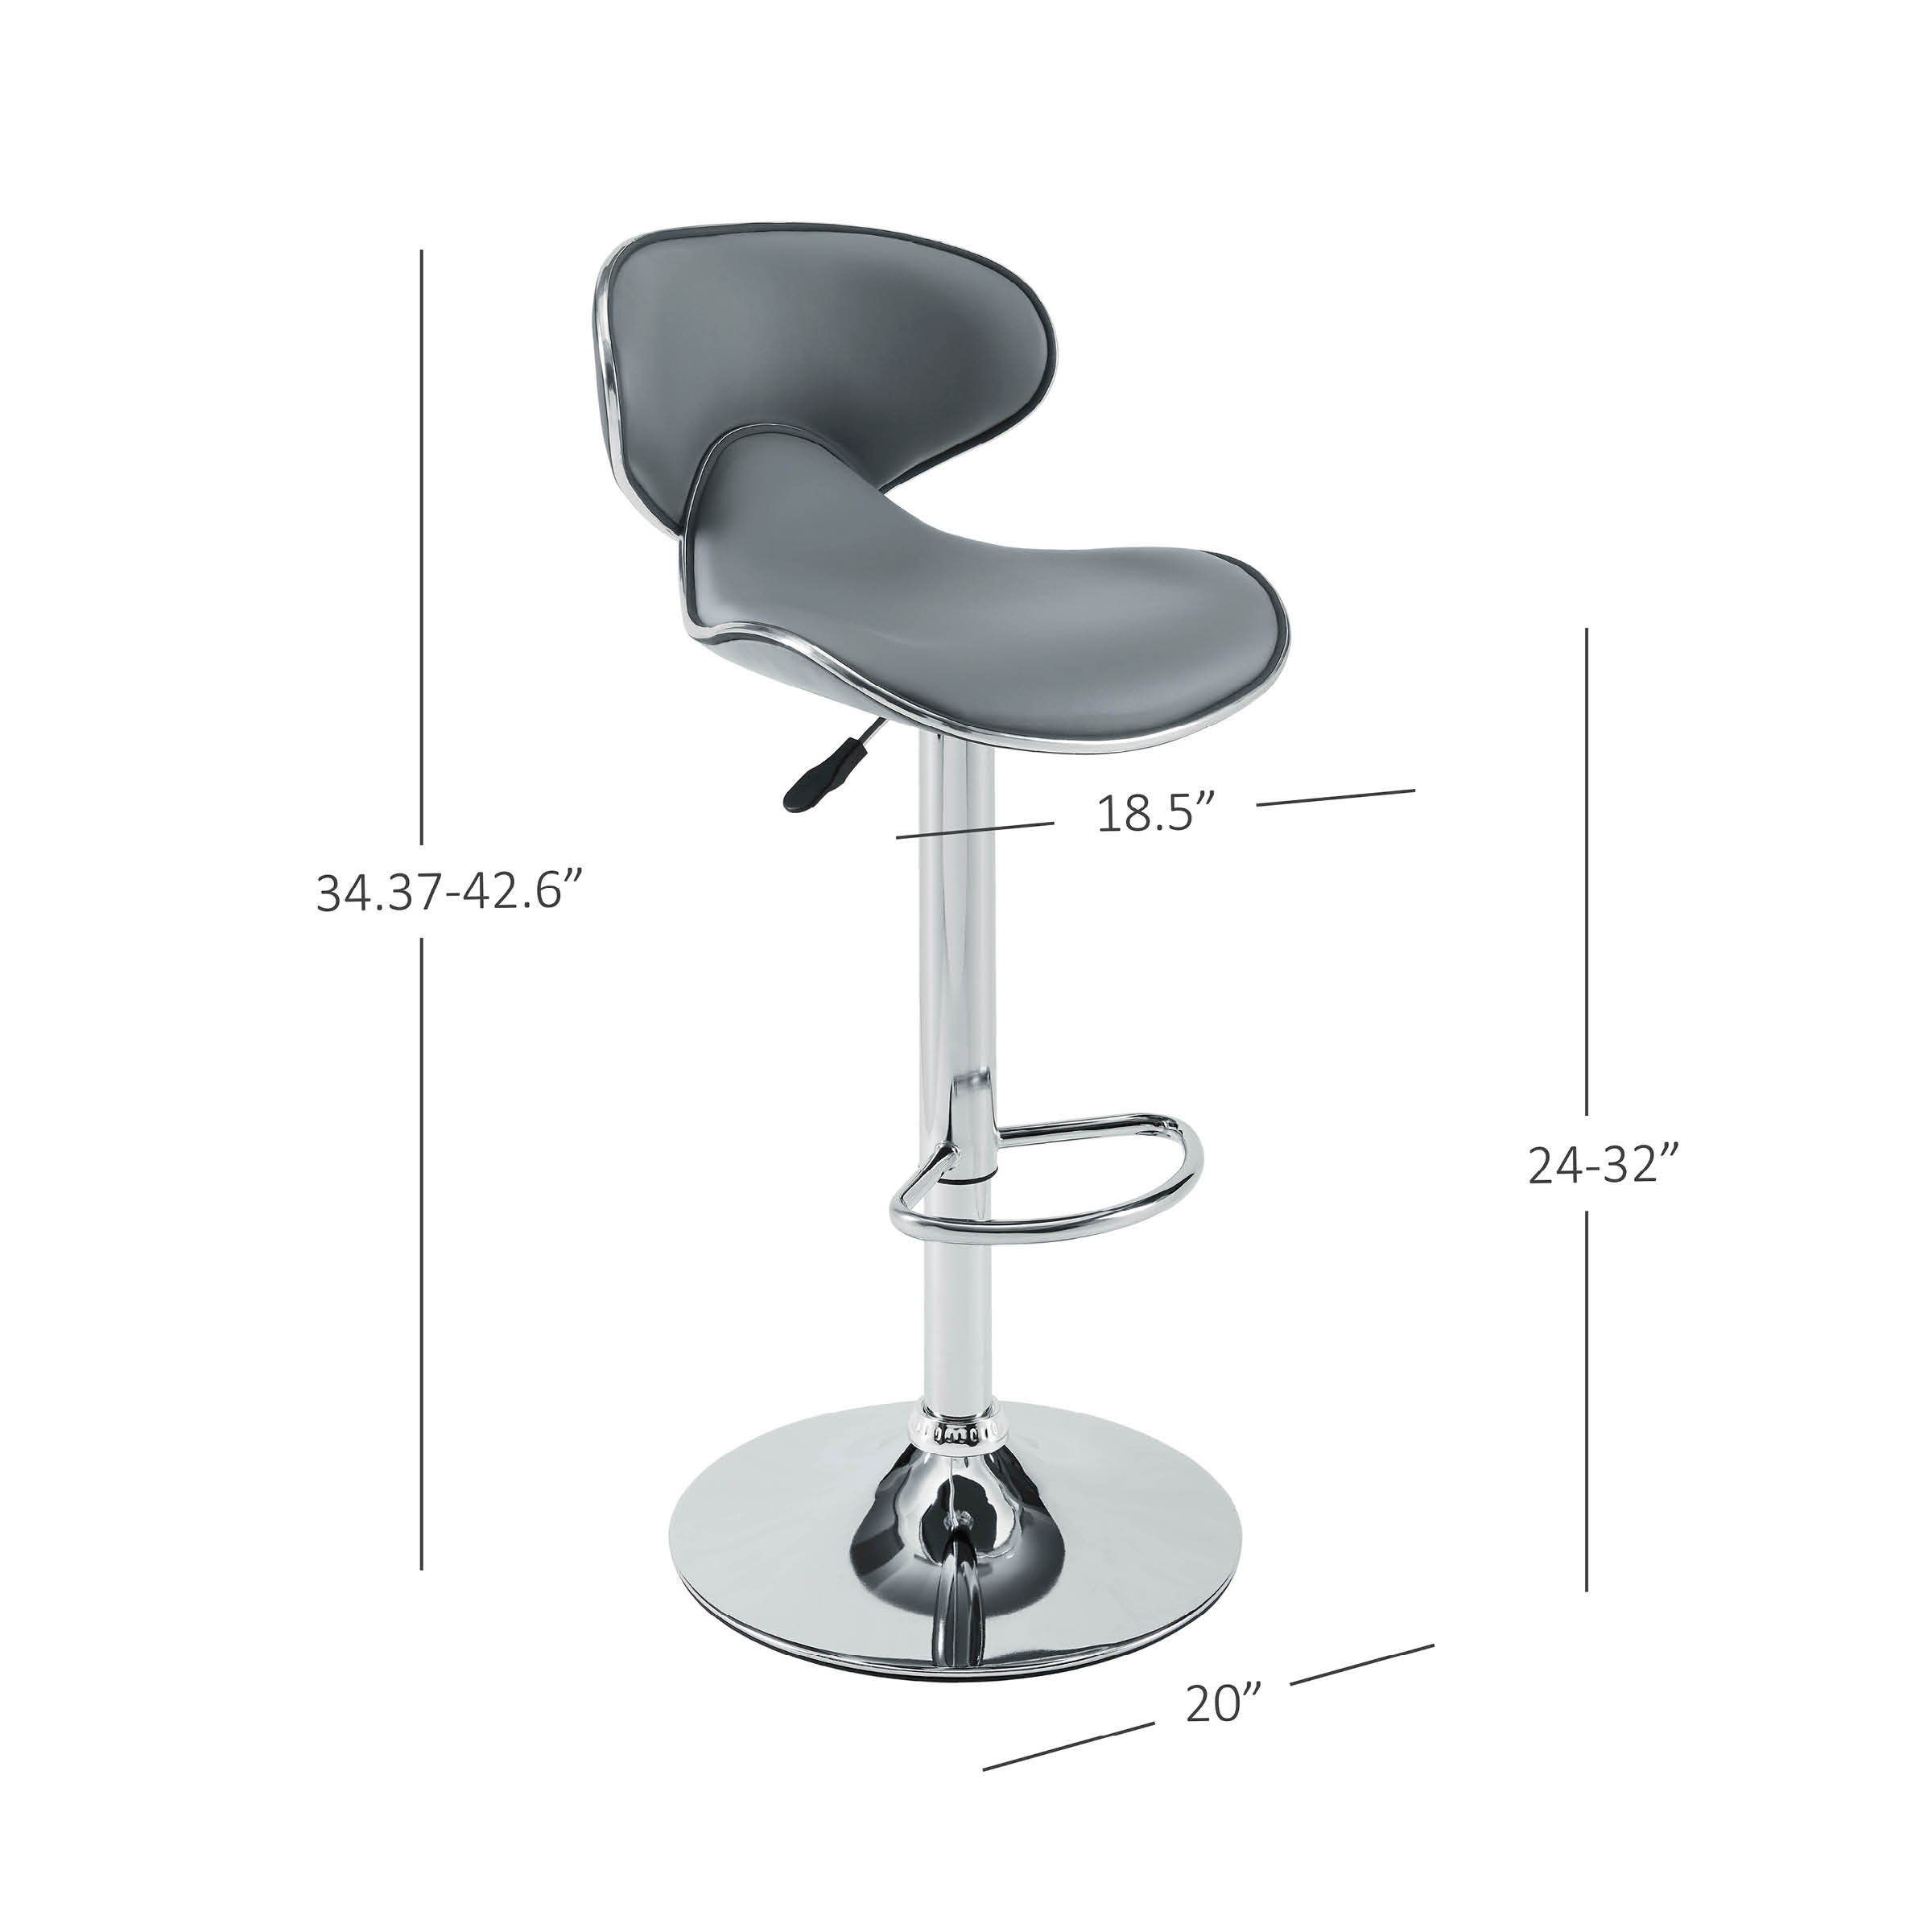 Powell Beldon 24-32" Indoor Adjustable Metal Bar Stool with Swivel, Gray Faux Leather - image 4 of 10